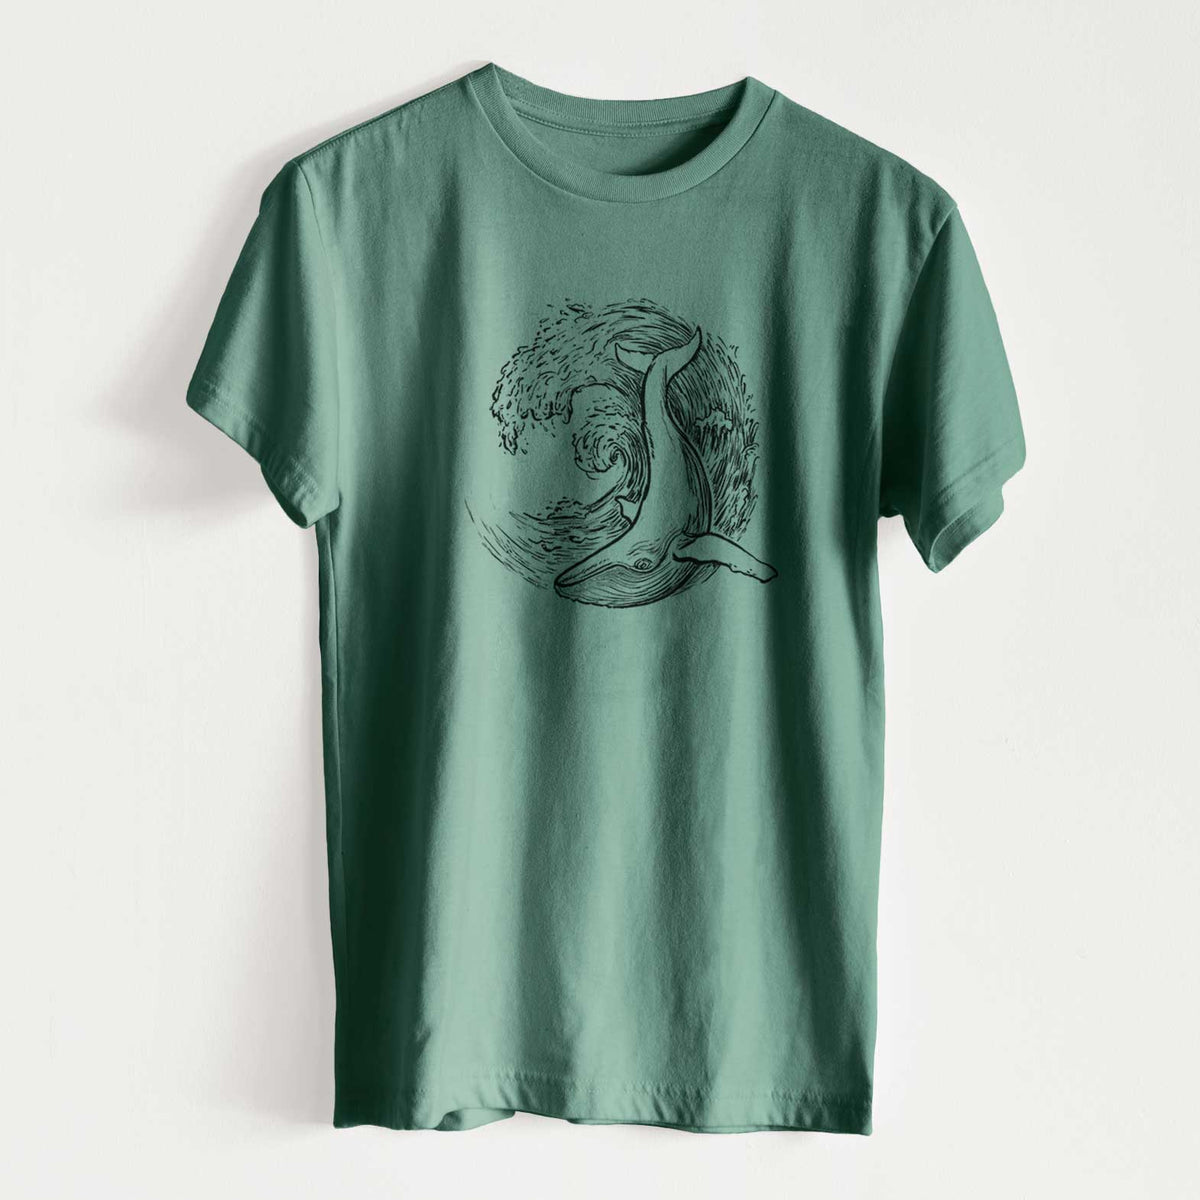 Whale Wave - Unisex Recycled Eco Tee  - CLOSEOUT - FINAL SALE